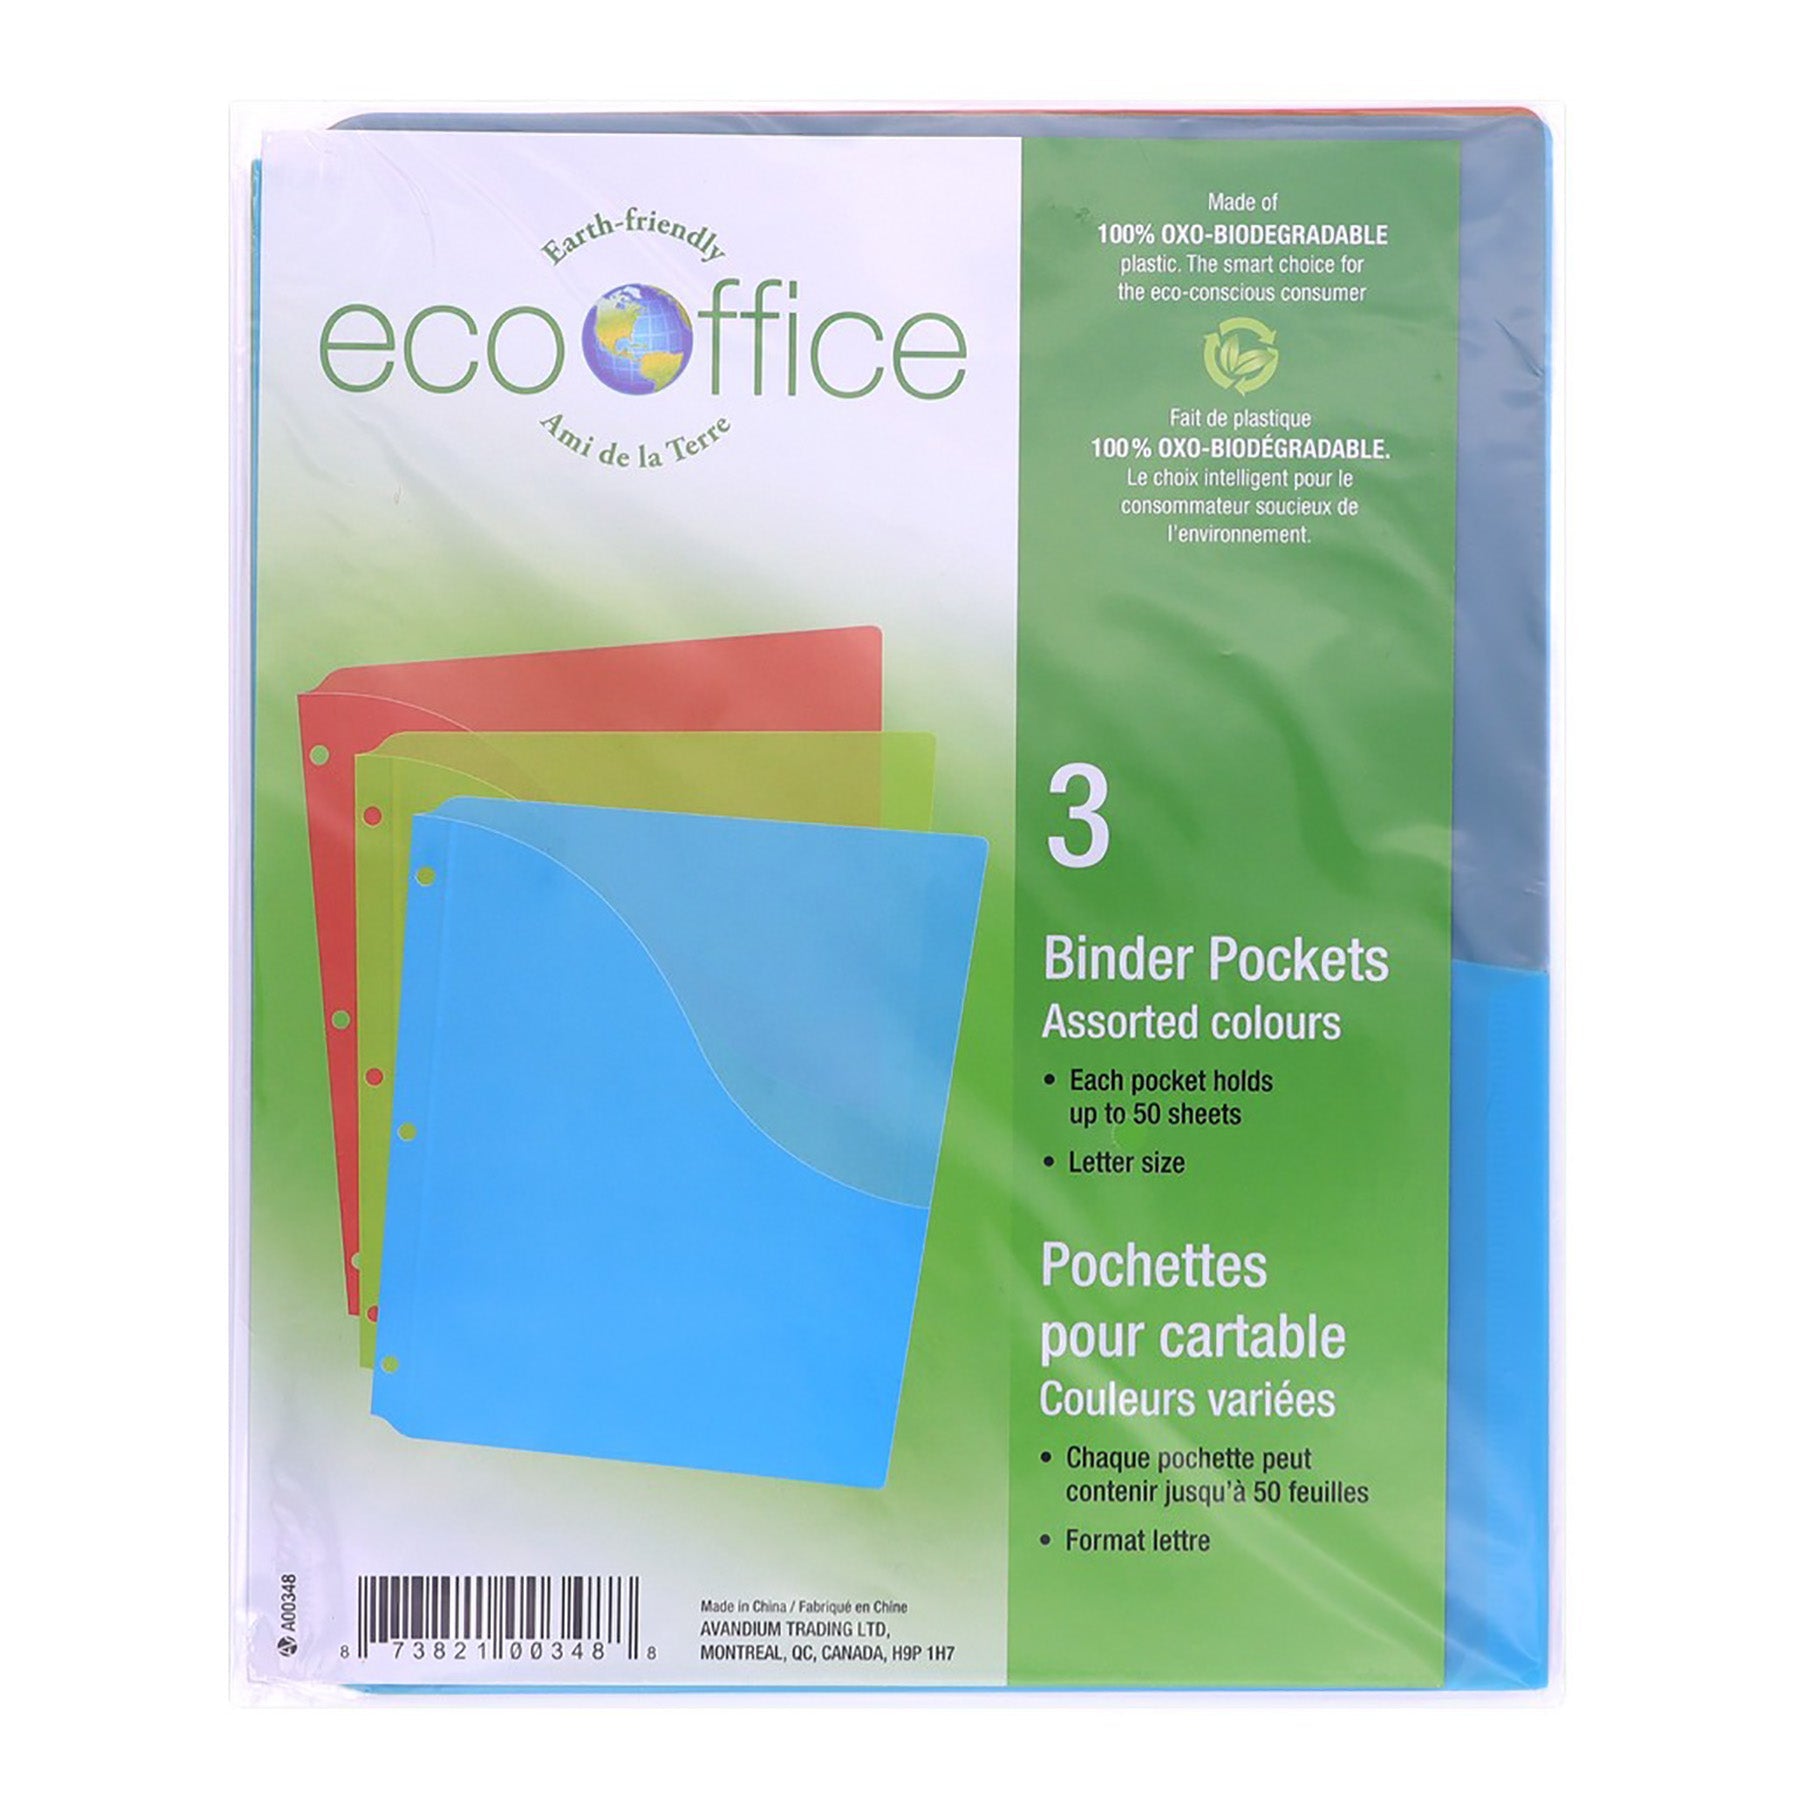 EcoOffice 3 Binder Pockets Colored Plastic 11.2x8.5in